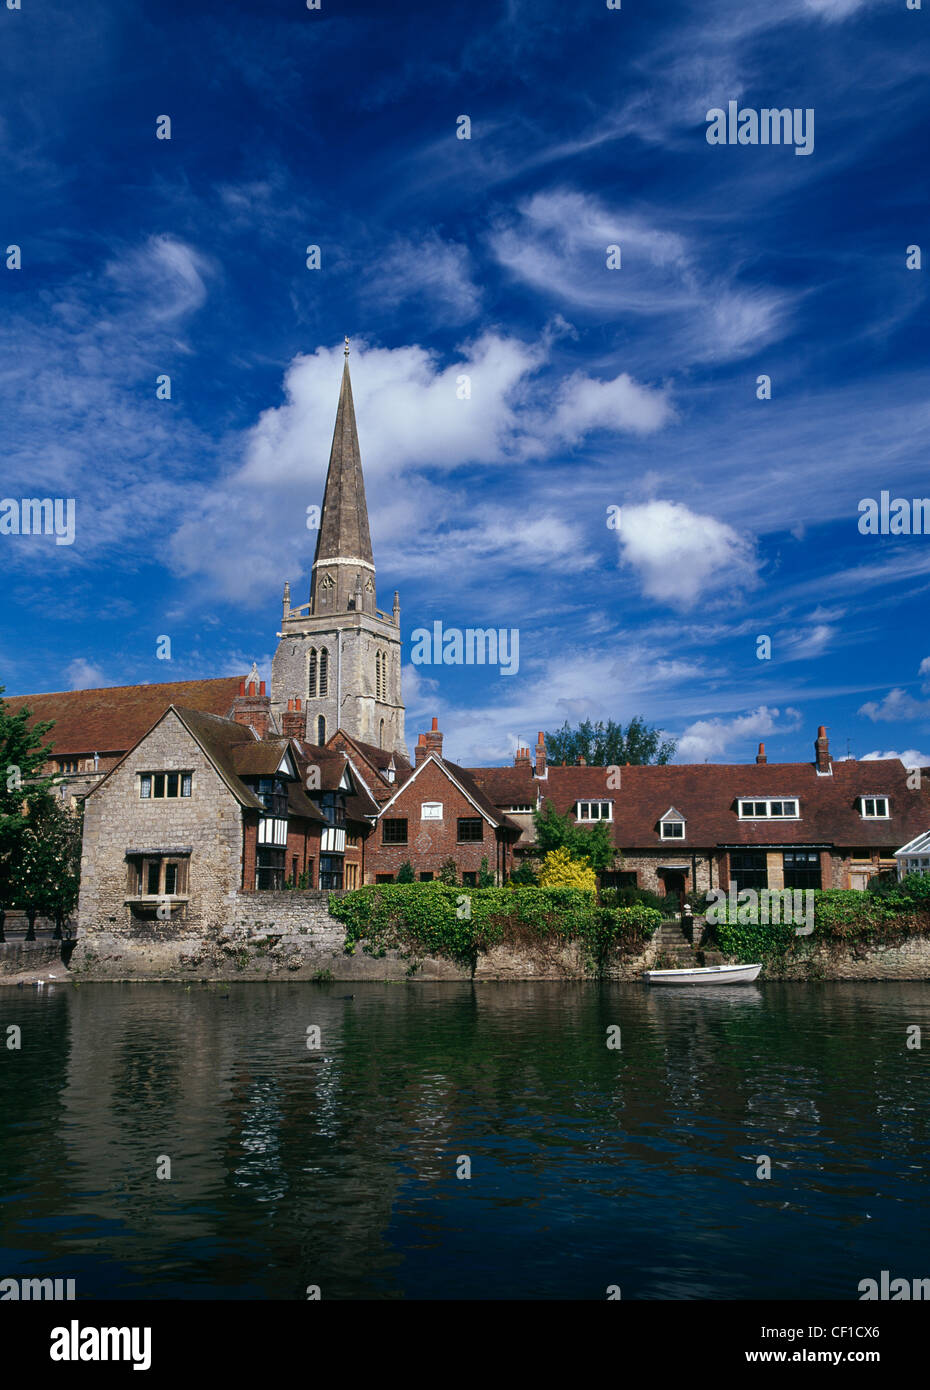 View of St Helens Church across the River Thames at Abingdon. Stock Photo